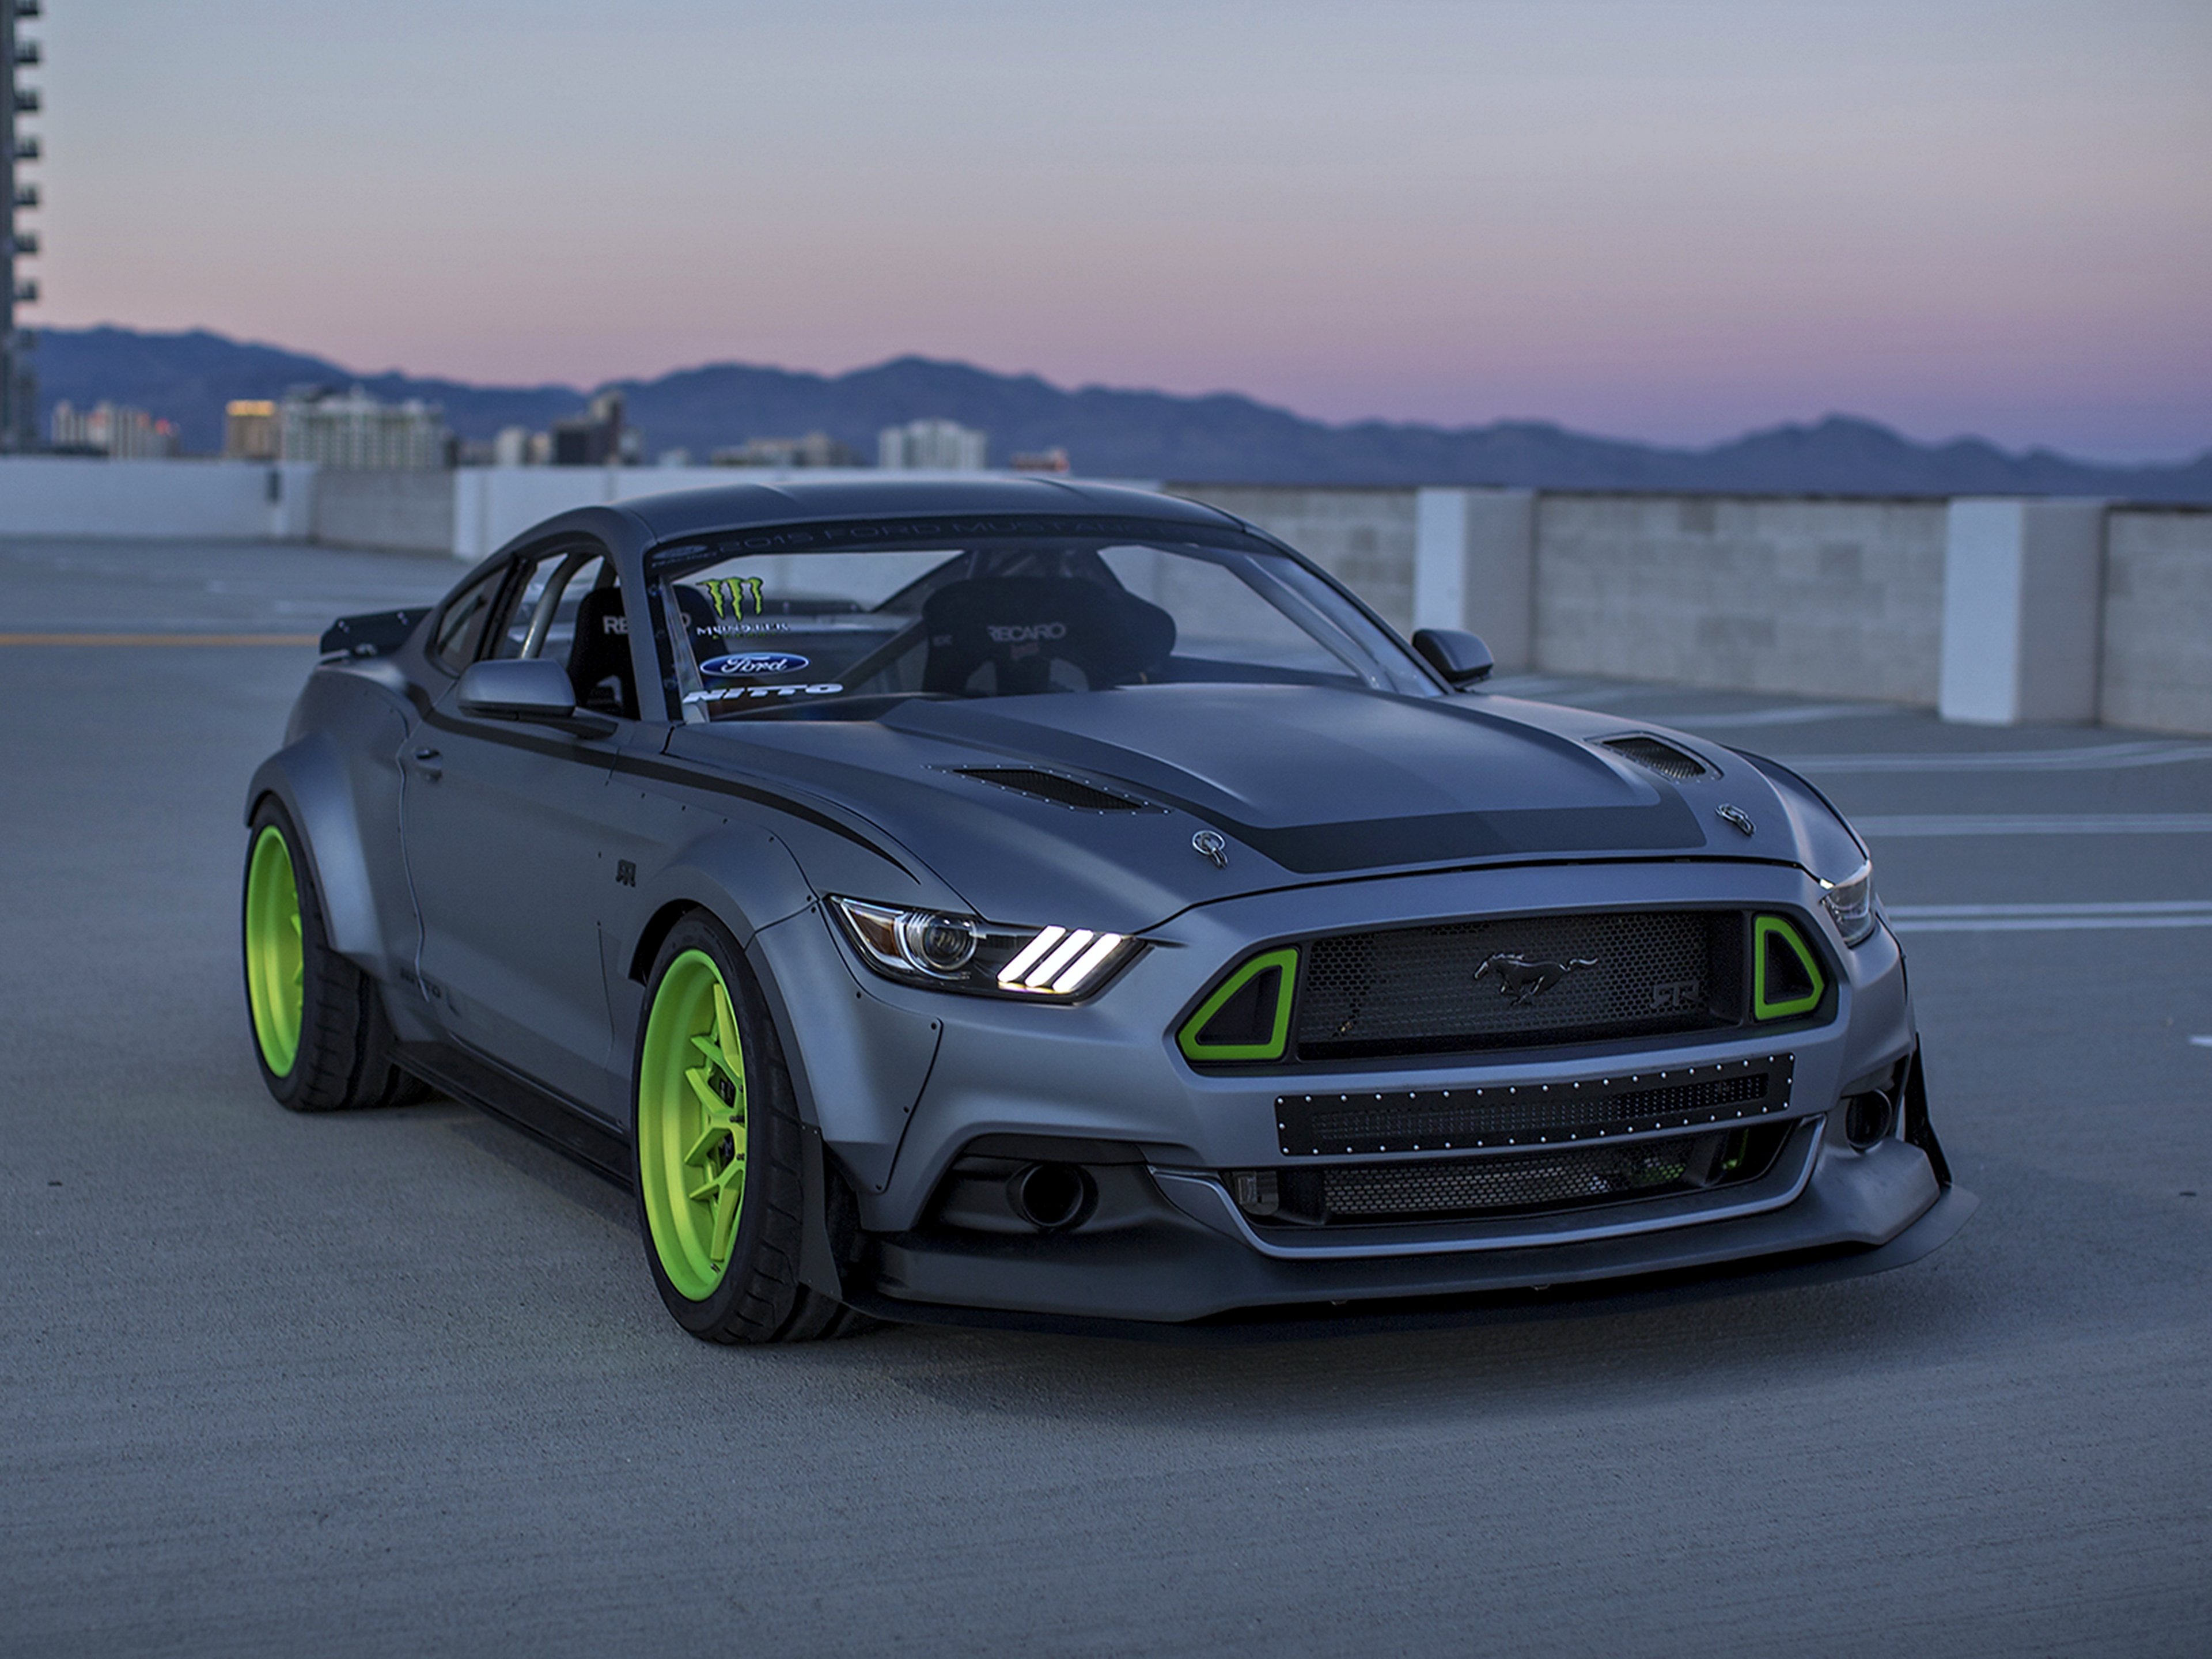 2014 Ford Mustang Rtr Spec 5 Gray Speed Motors Supercars Images, Photos, Reviews